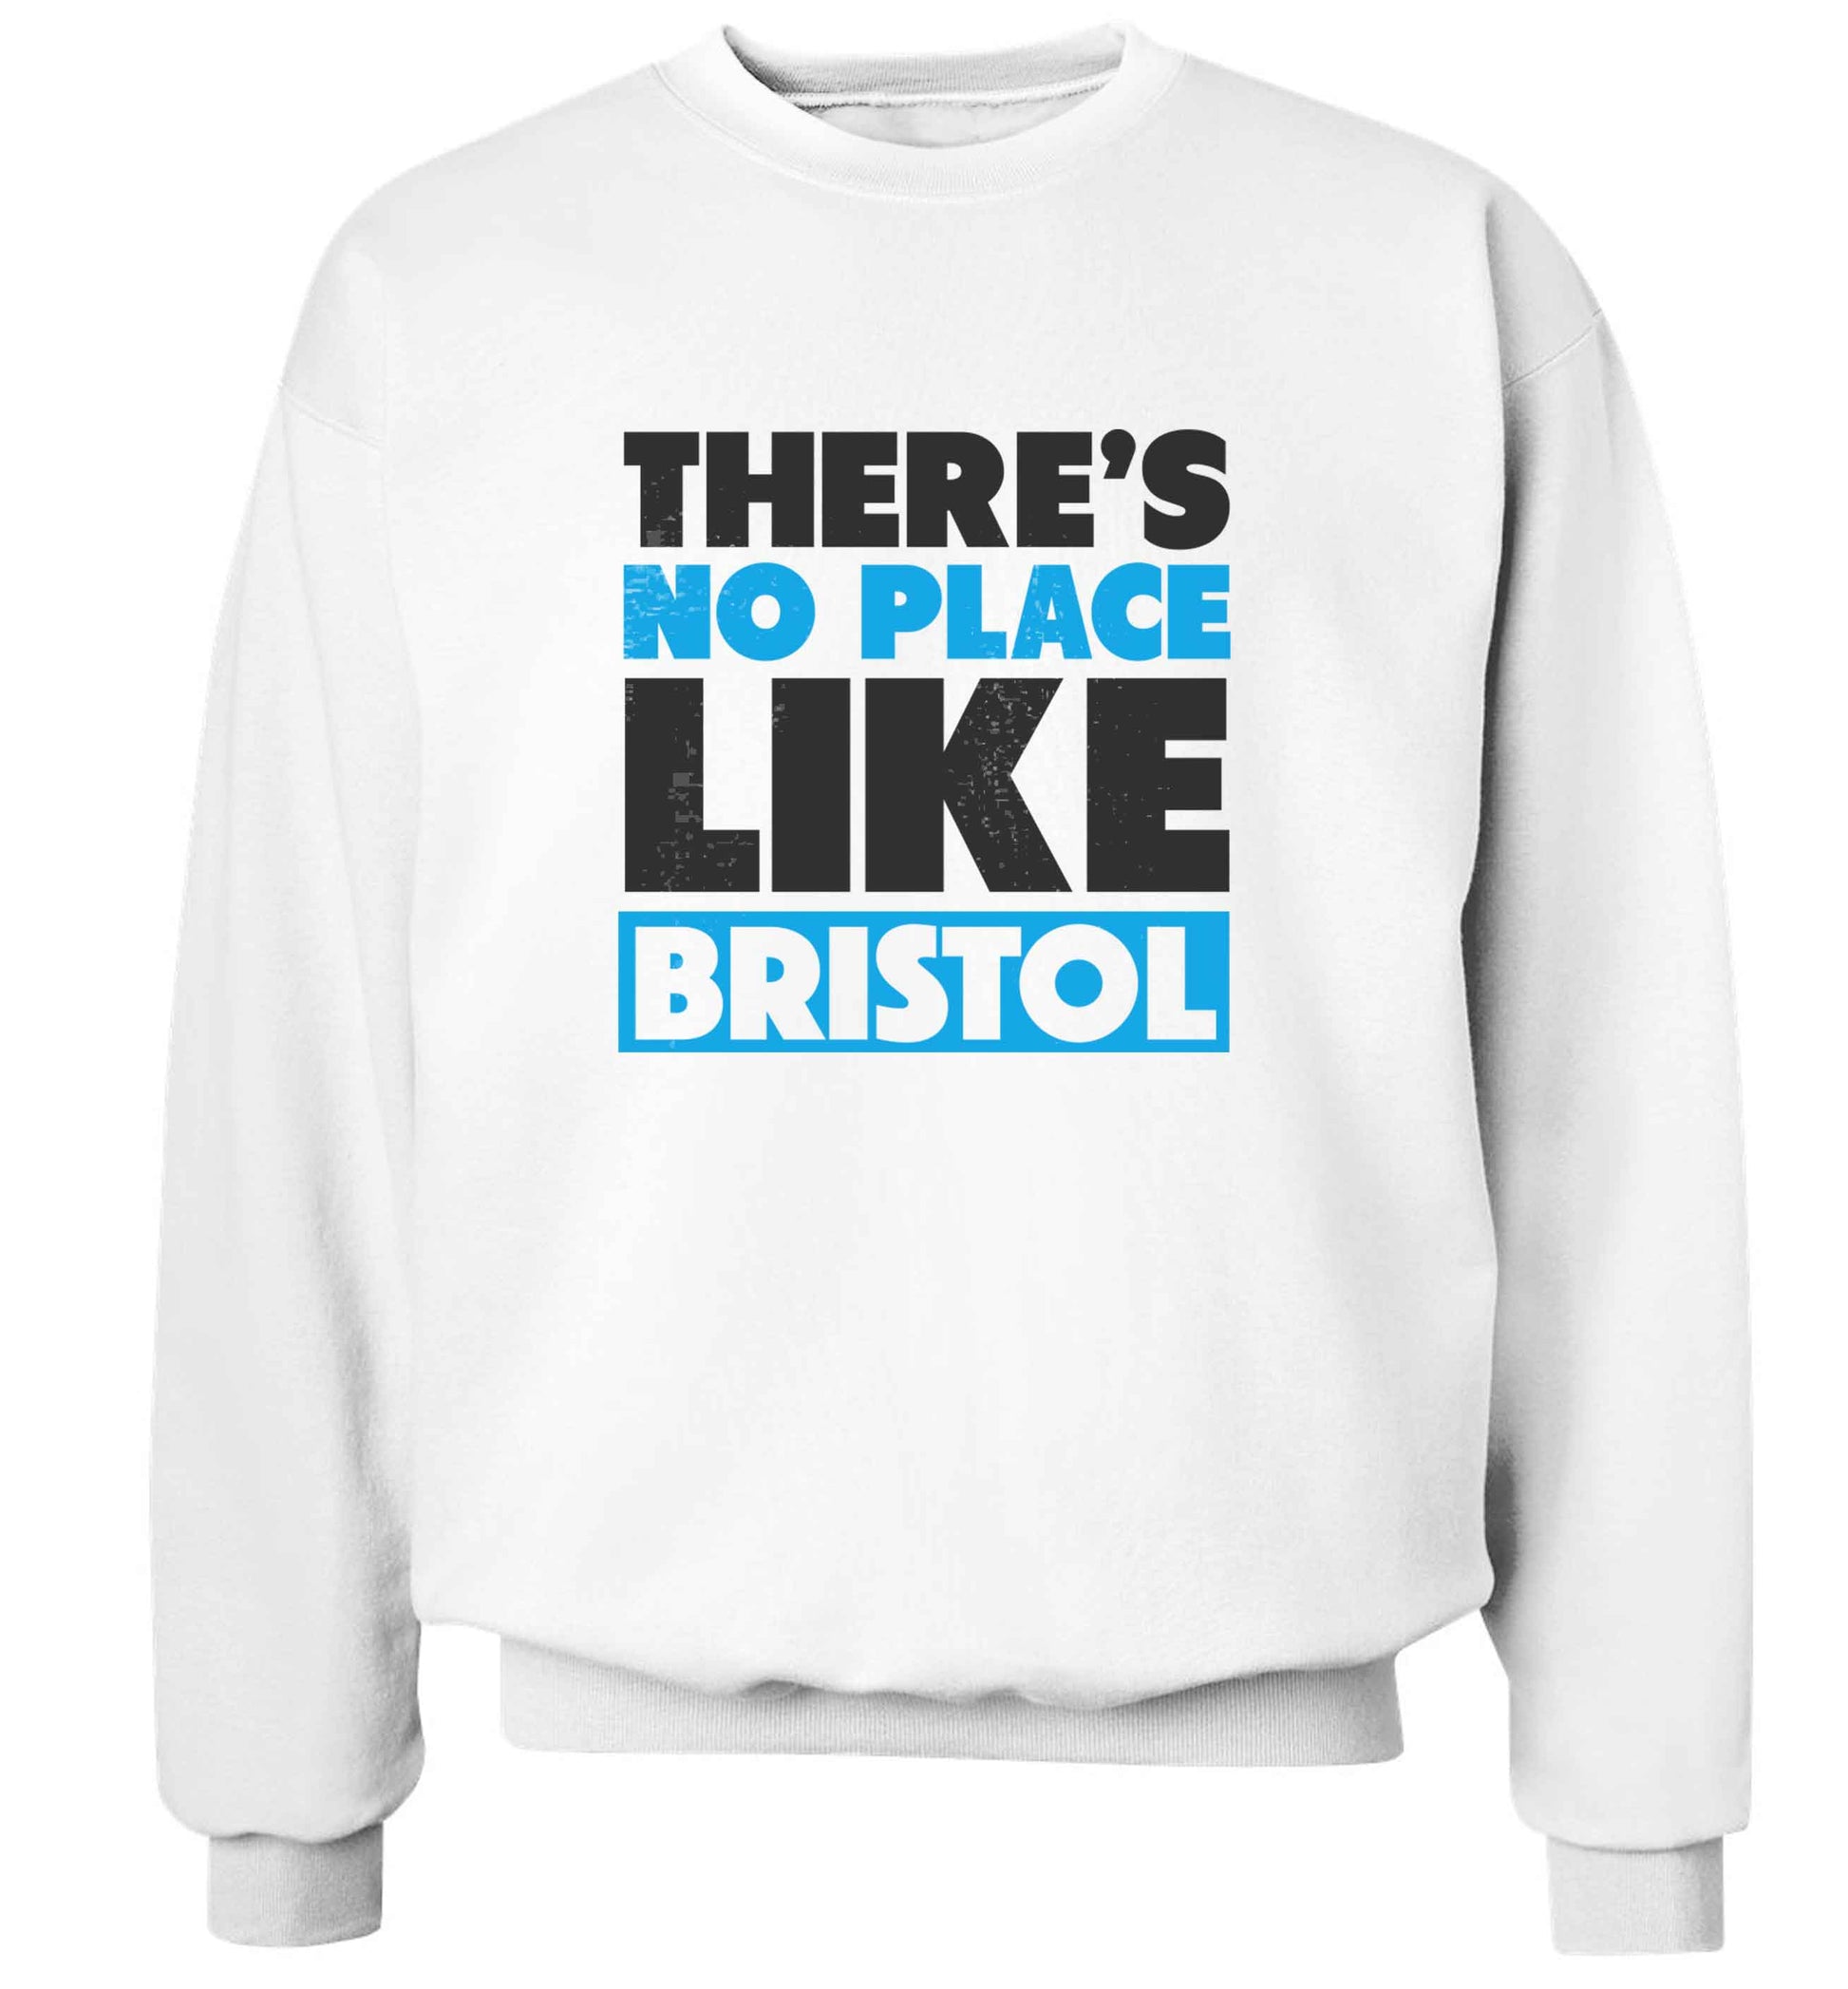 There's no place like Bristol adult's unisex white sweater 2XL